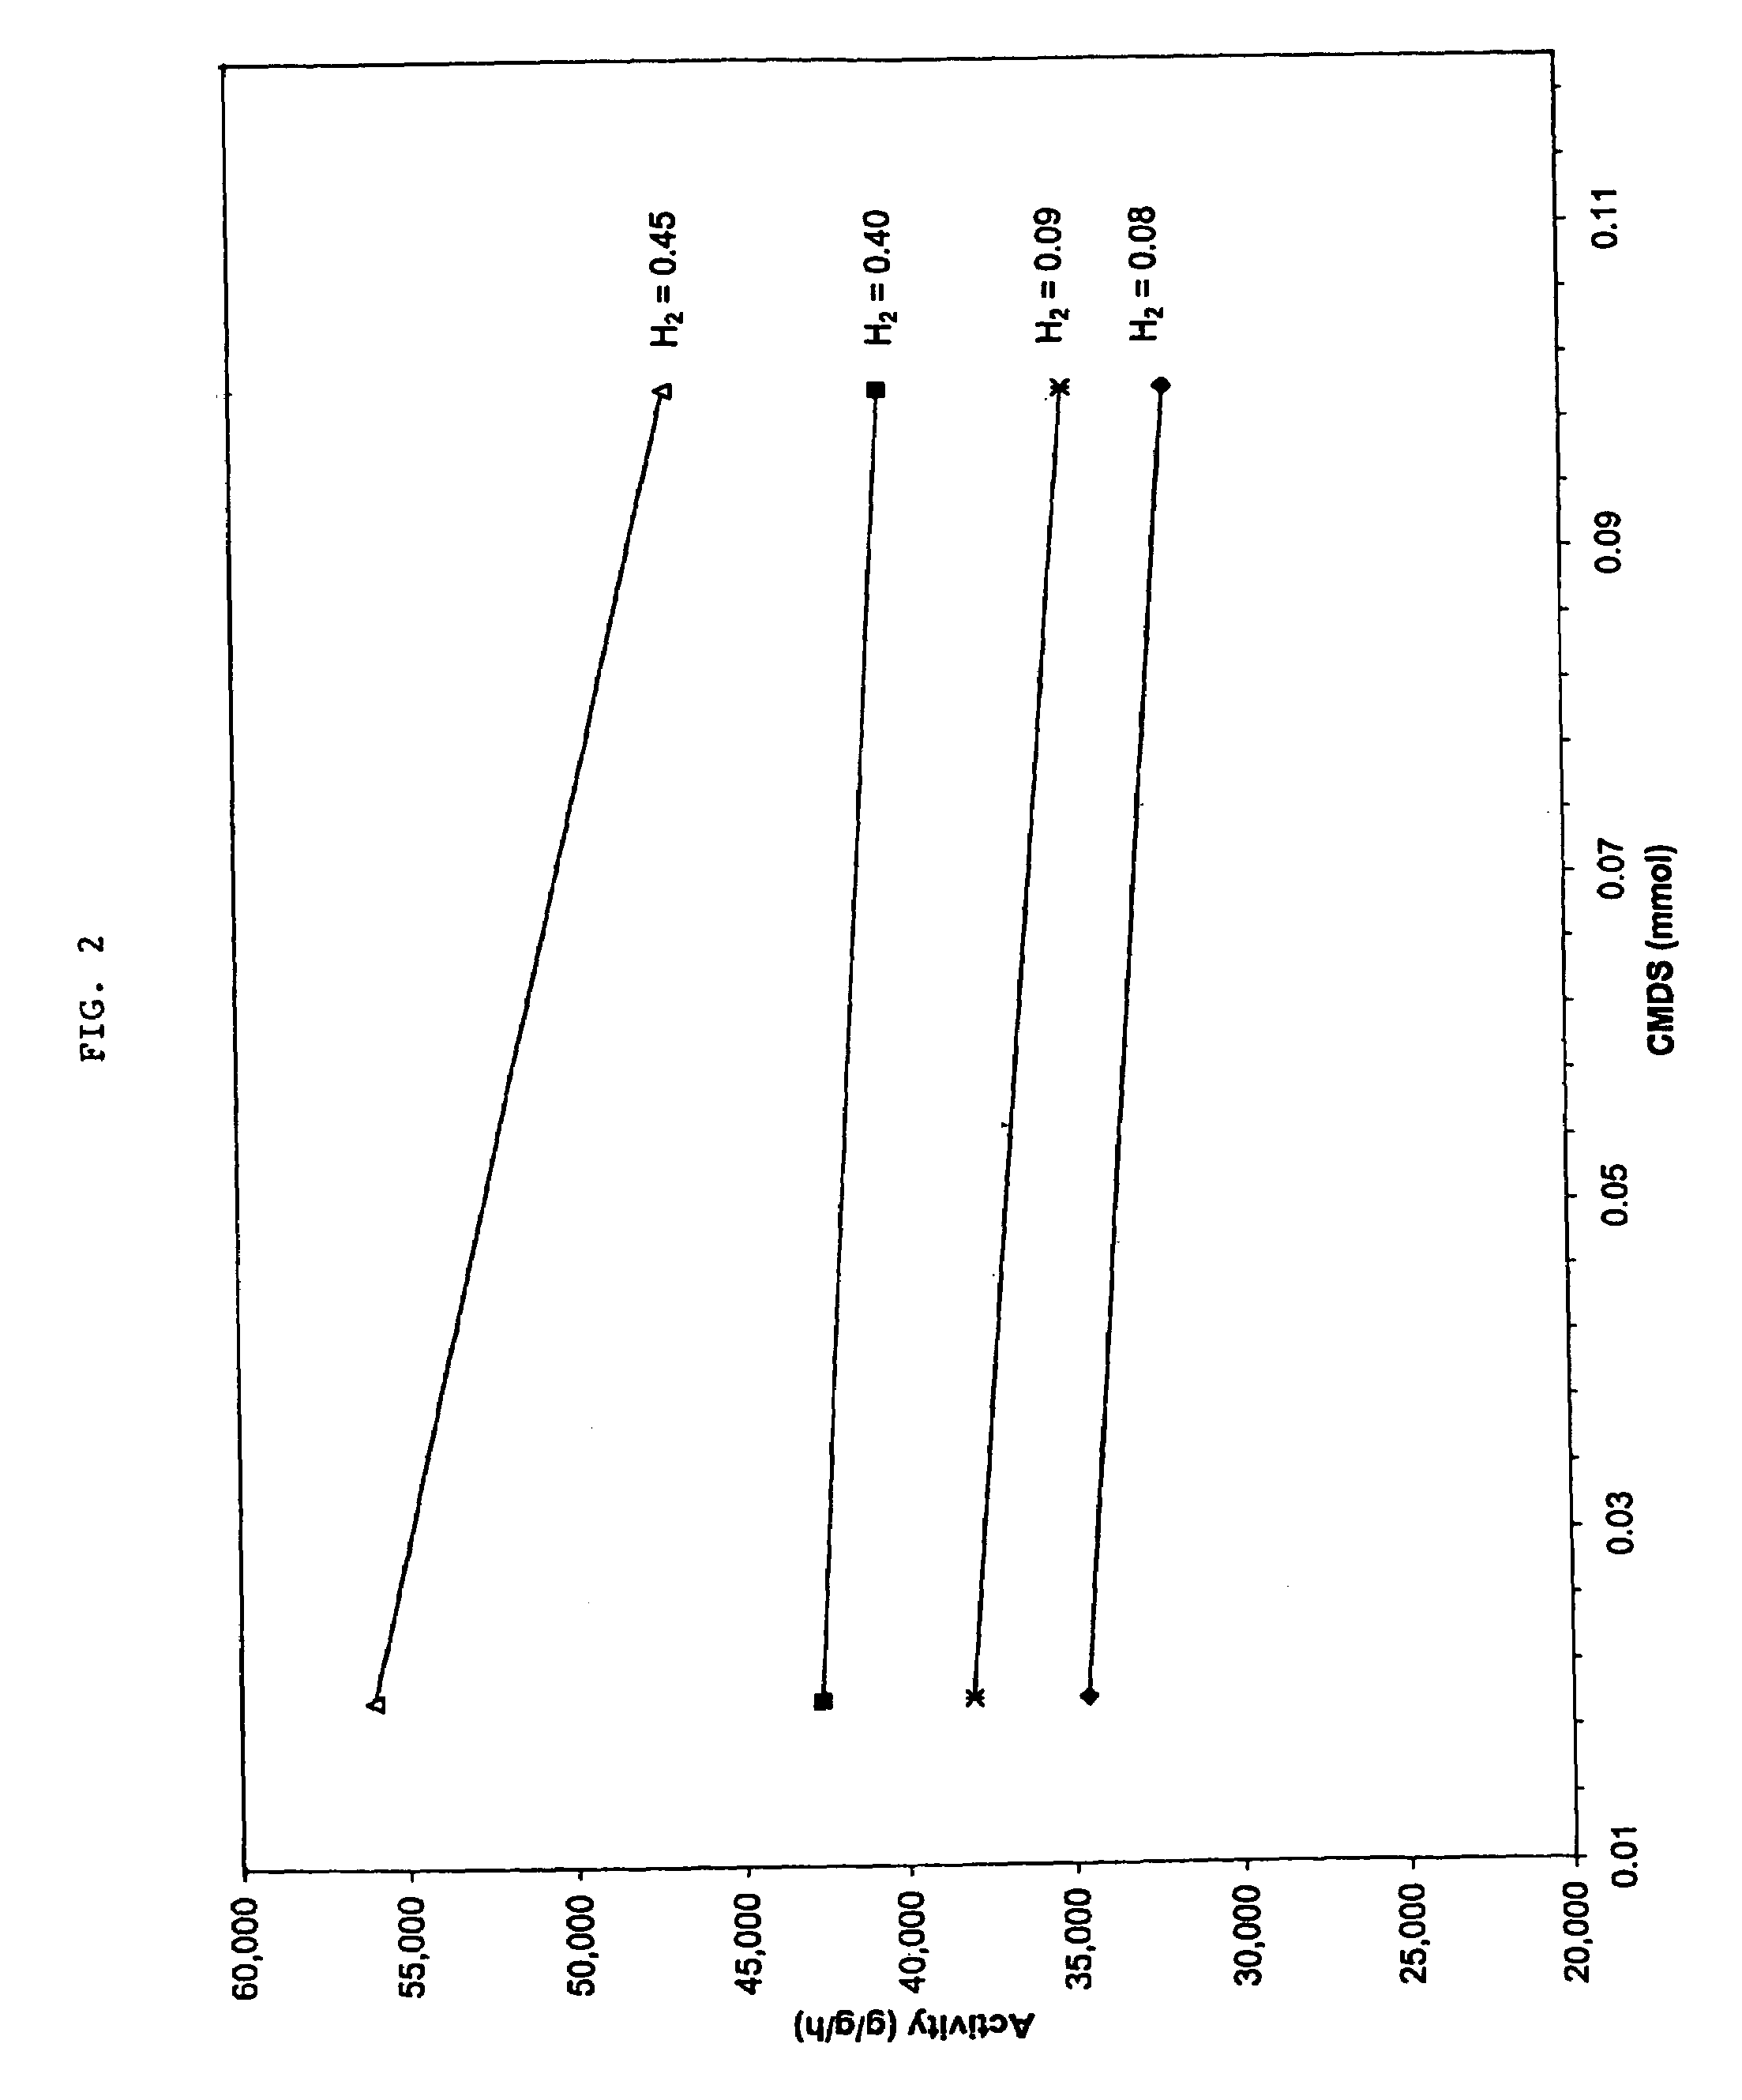 Process for forming a ziegler-natta catalyst system having a controlled morphology